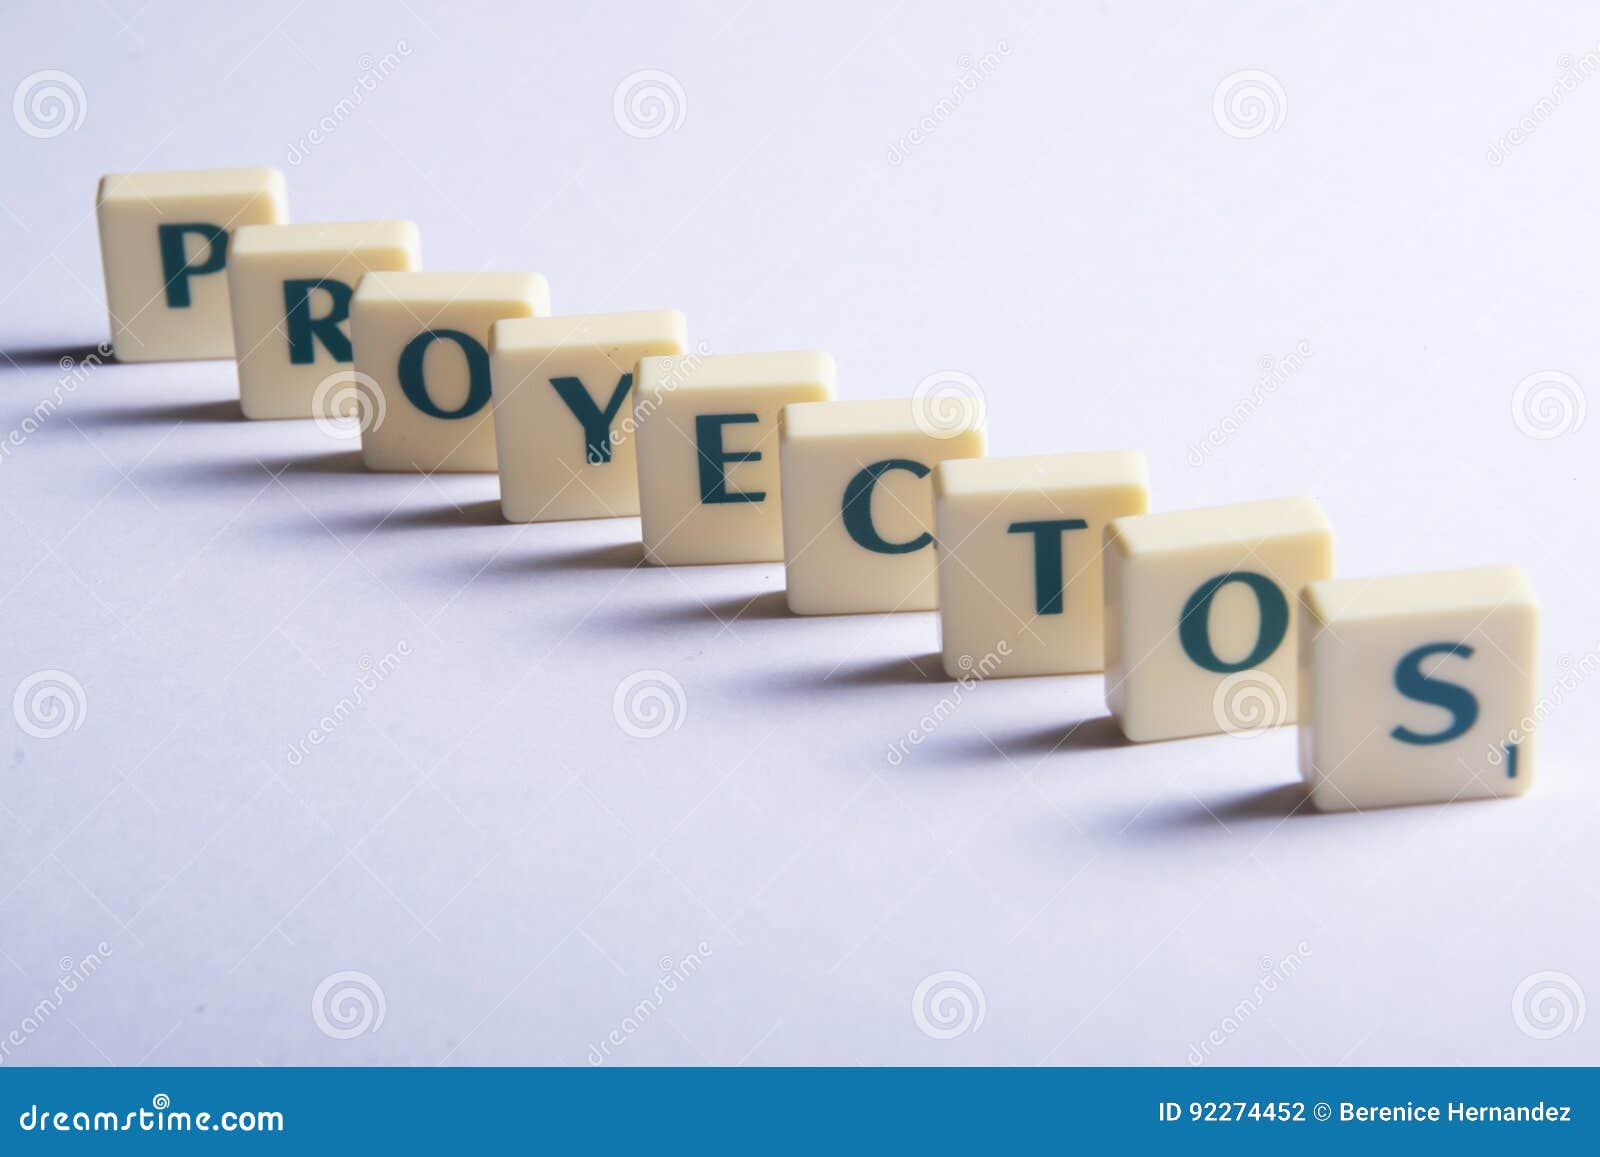 proyectos, project